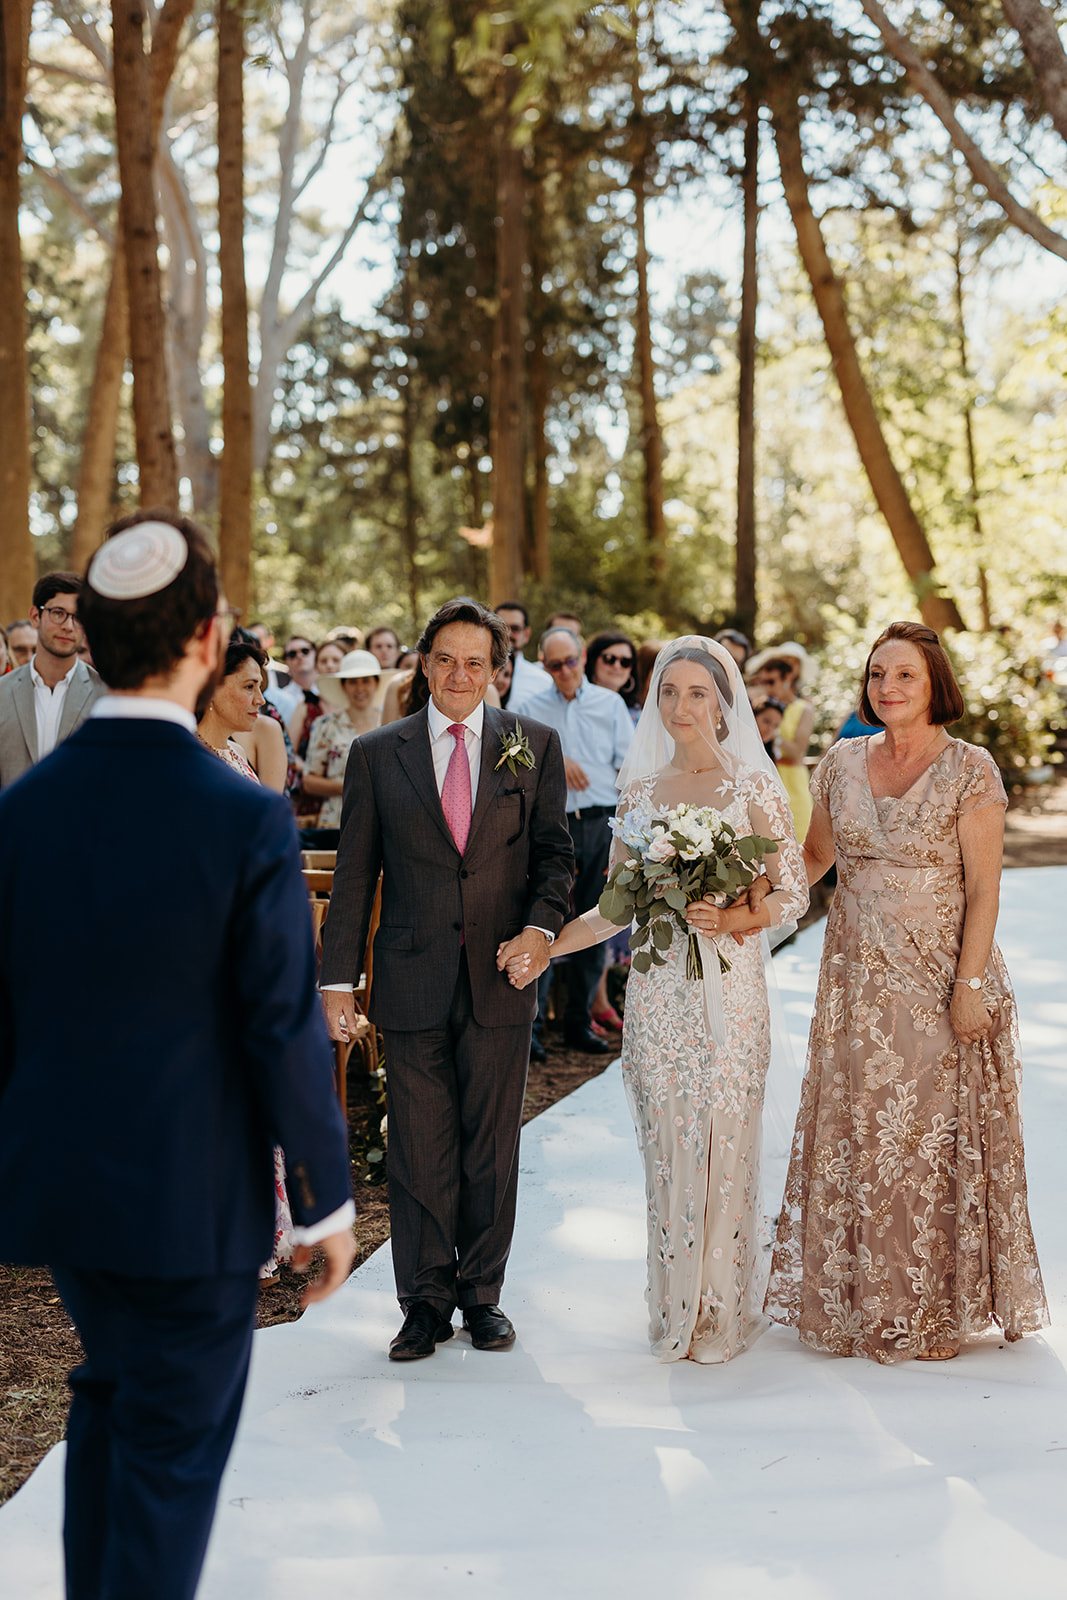 Bride being walked down aisle to outdoor ceremony in France